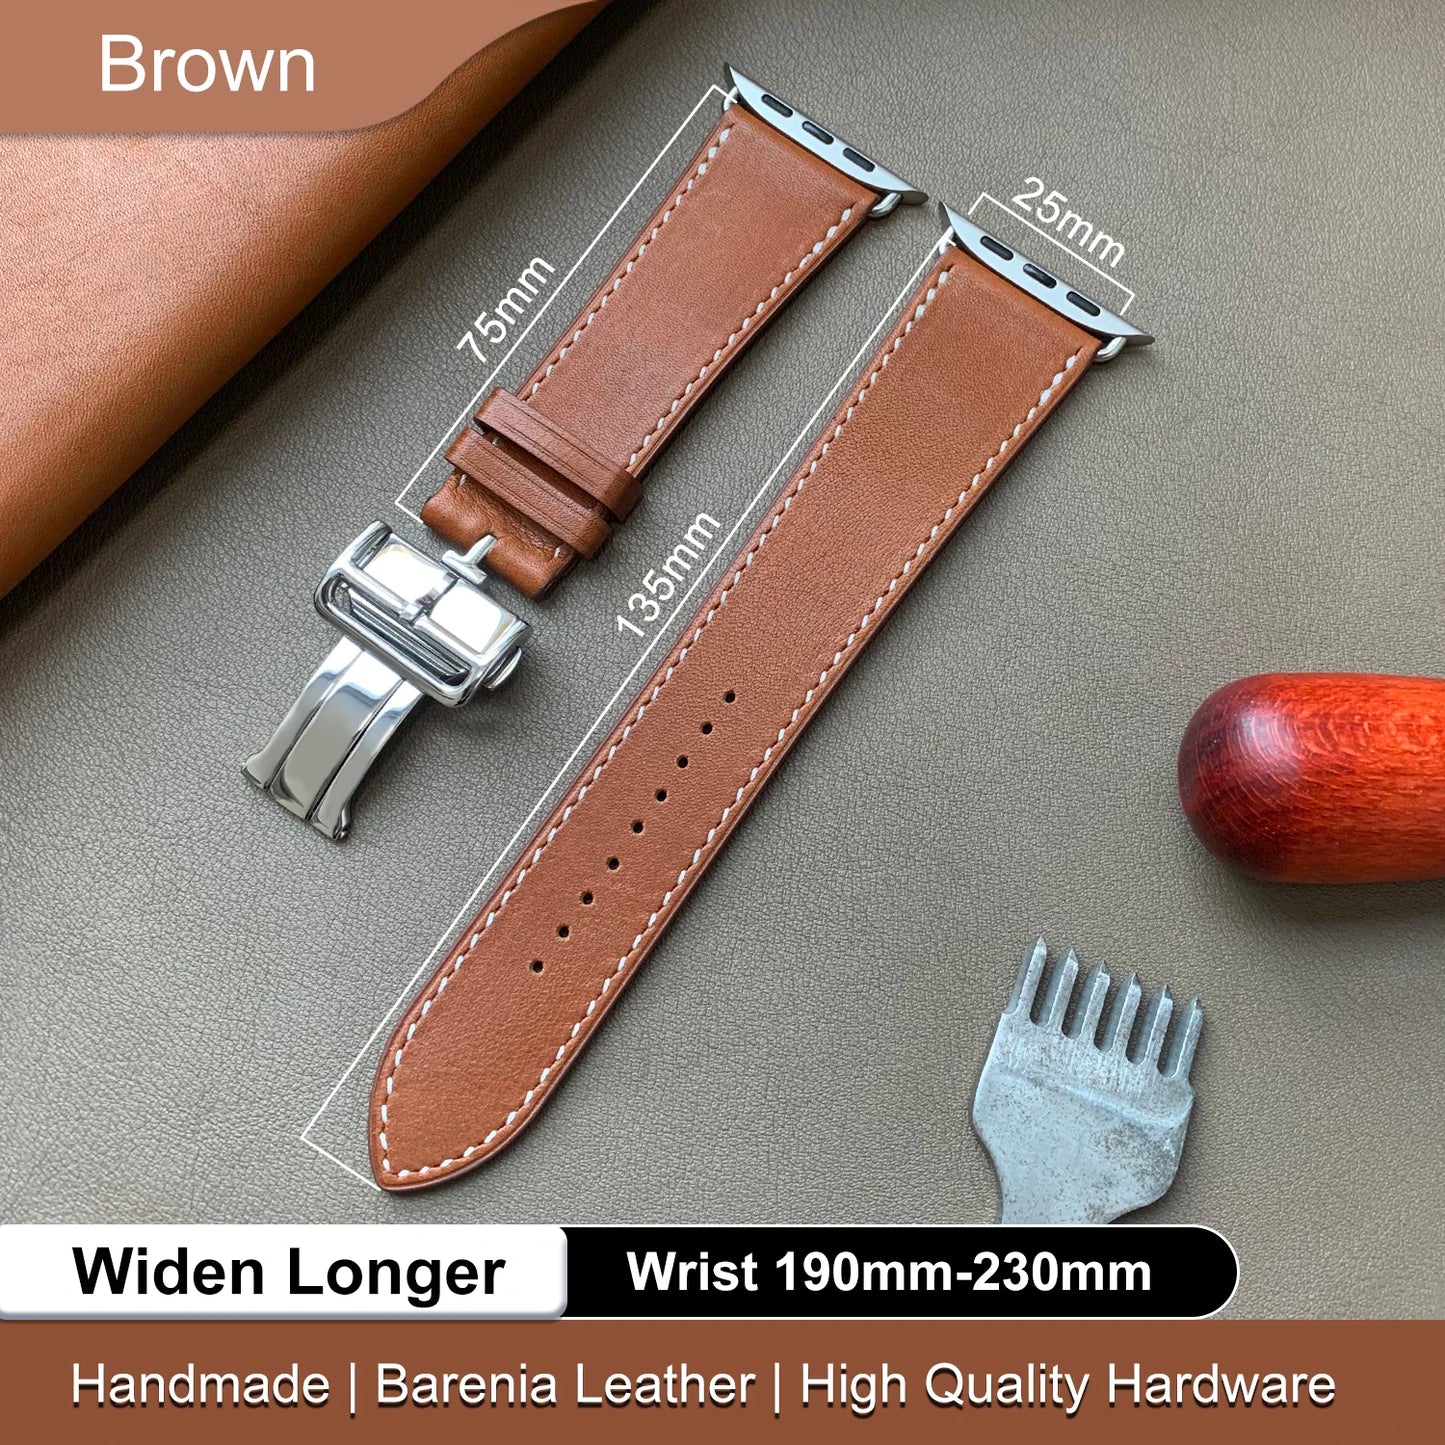 High Quality Genuine Leather Band Deployment Buckle Debuckle For Iwatch Ultra 2 Apple Watch Series 9 8 7 6 Se 5 41mm 45mm 49MM